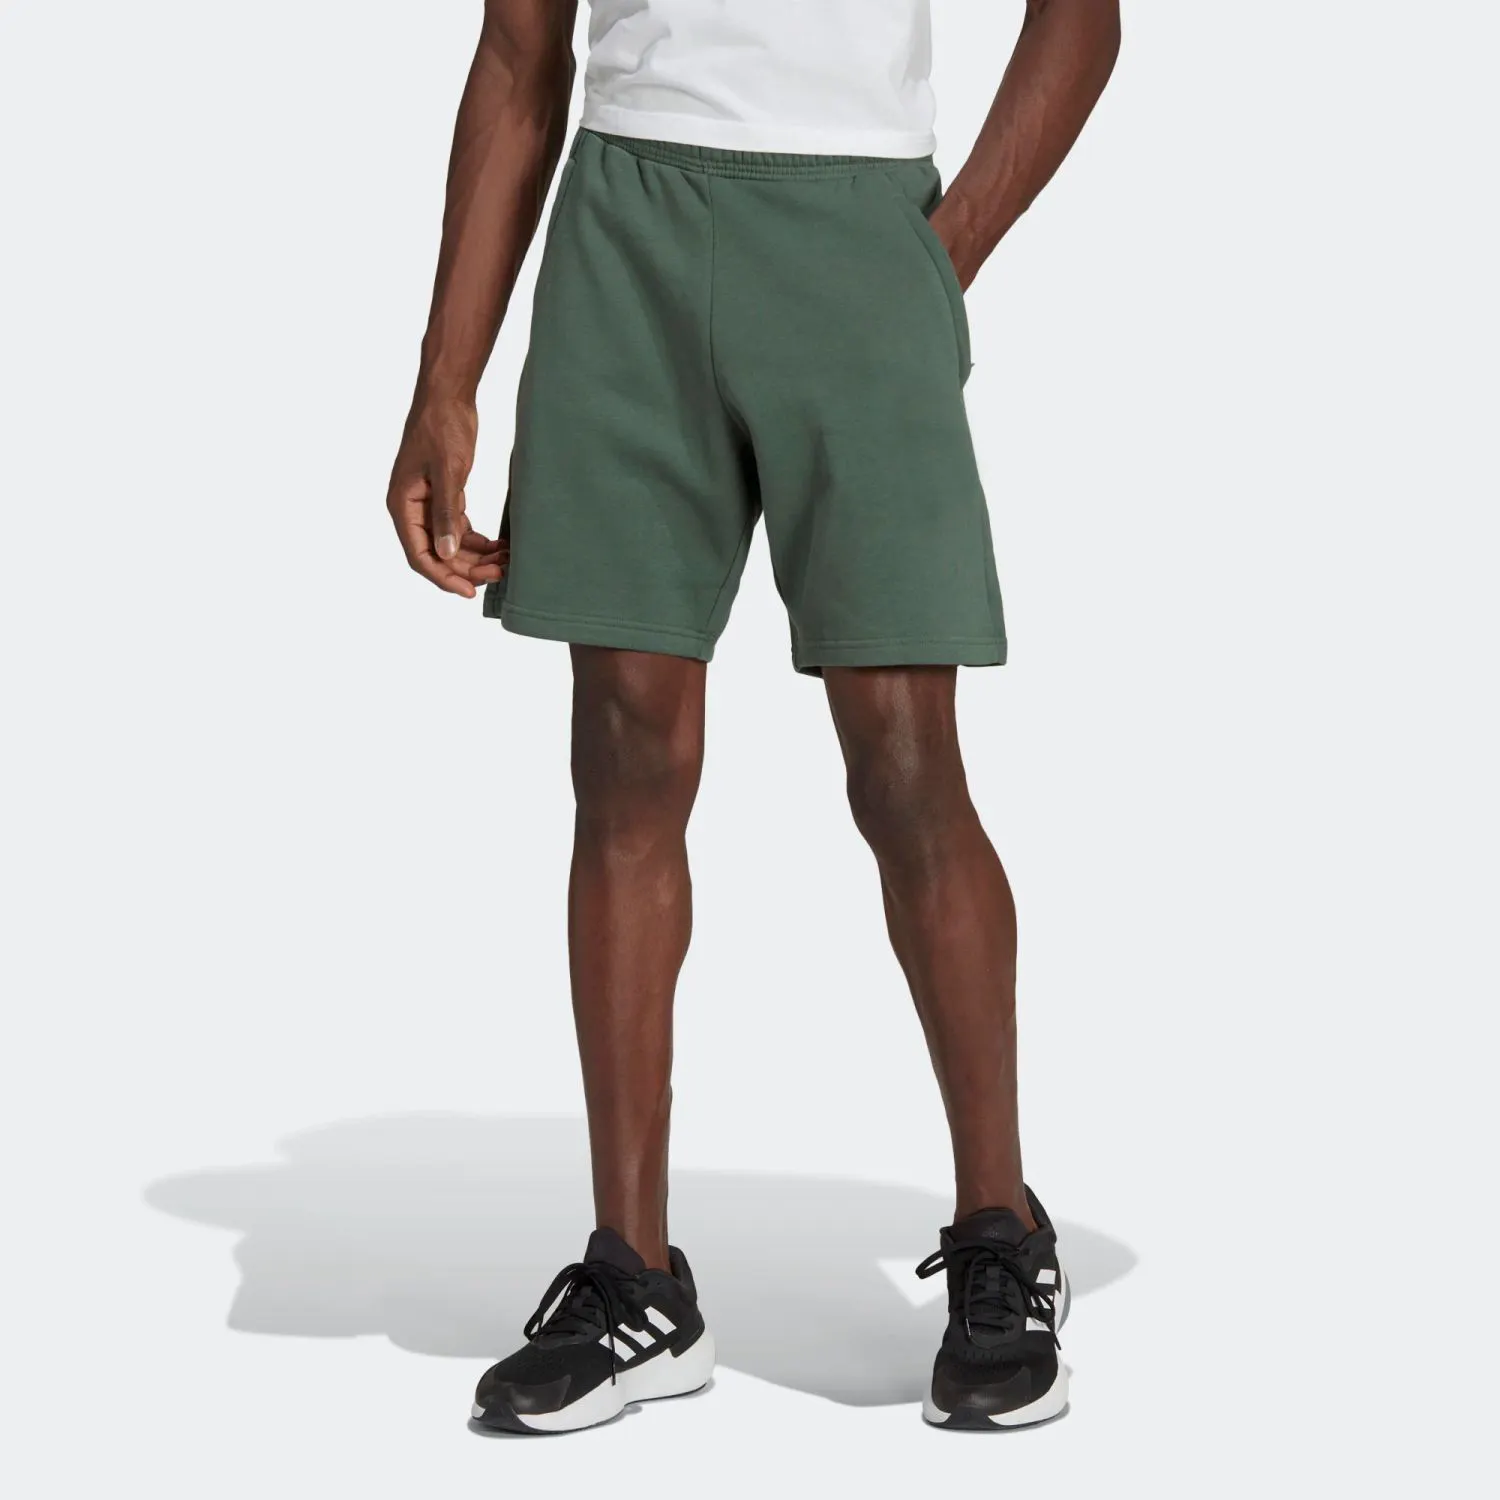 Regular Fit Drawcord on Elastic Waist 70% Cotton 30% Recycled Polyester Fleece Oxide Green Sports Shorts